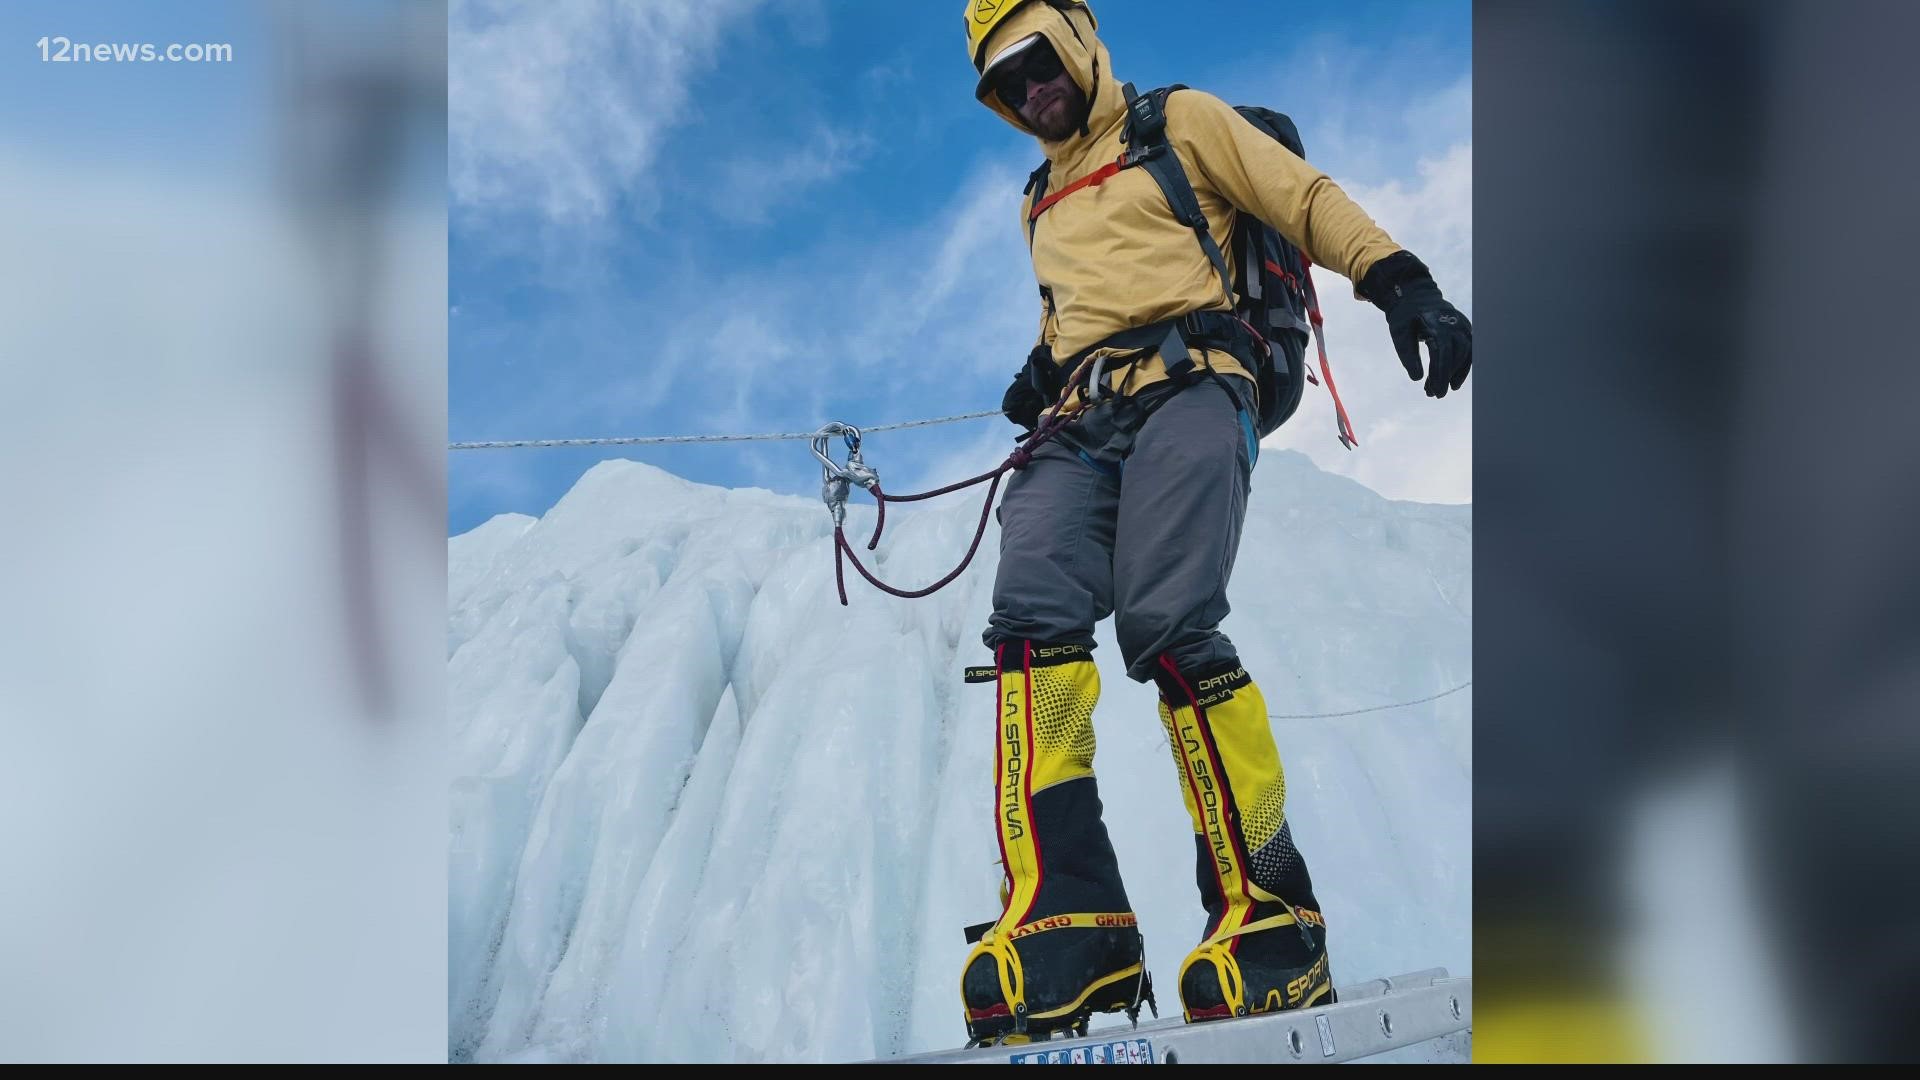 Clayton Wolfe is getting ready to climb Mount Everest. He's been training for six years.